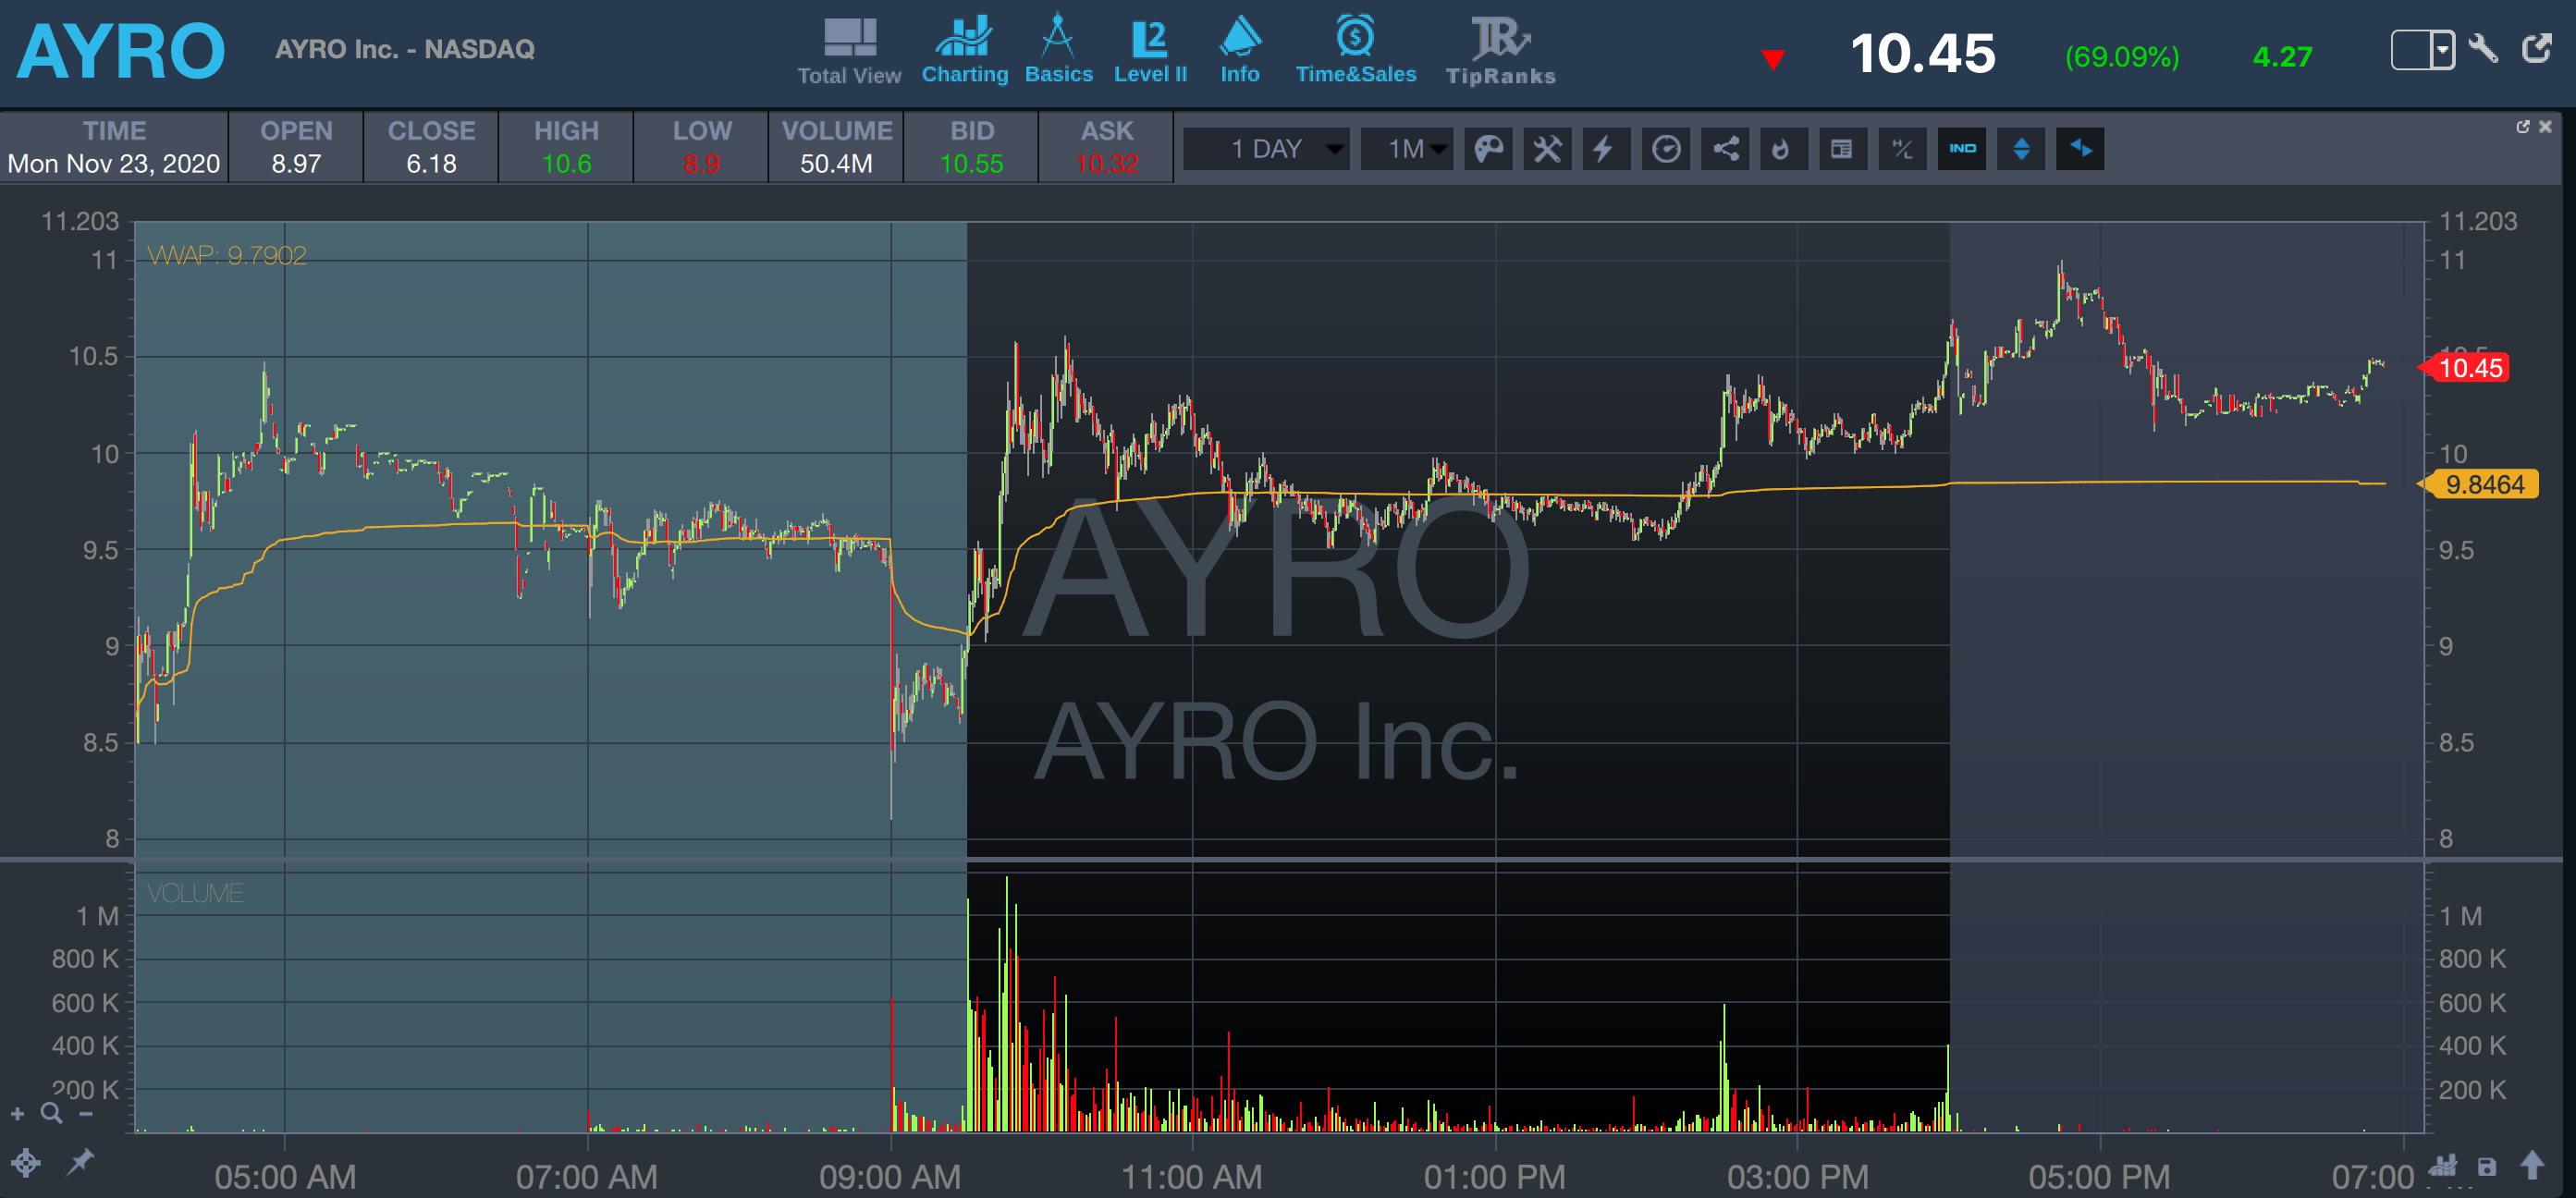 diluted shares ayro